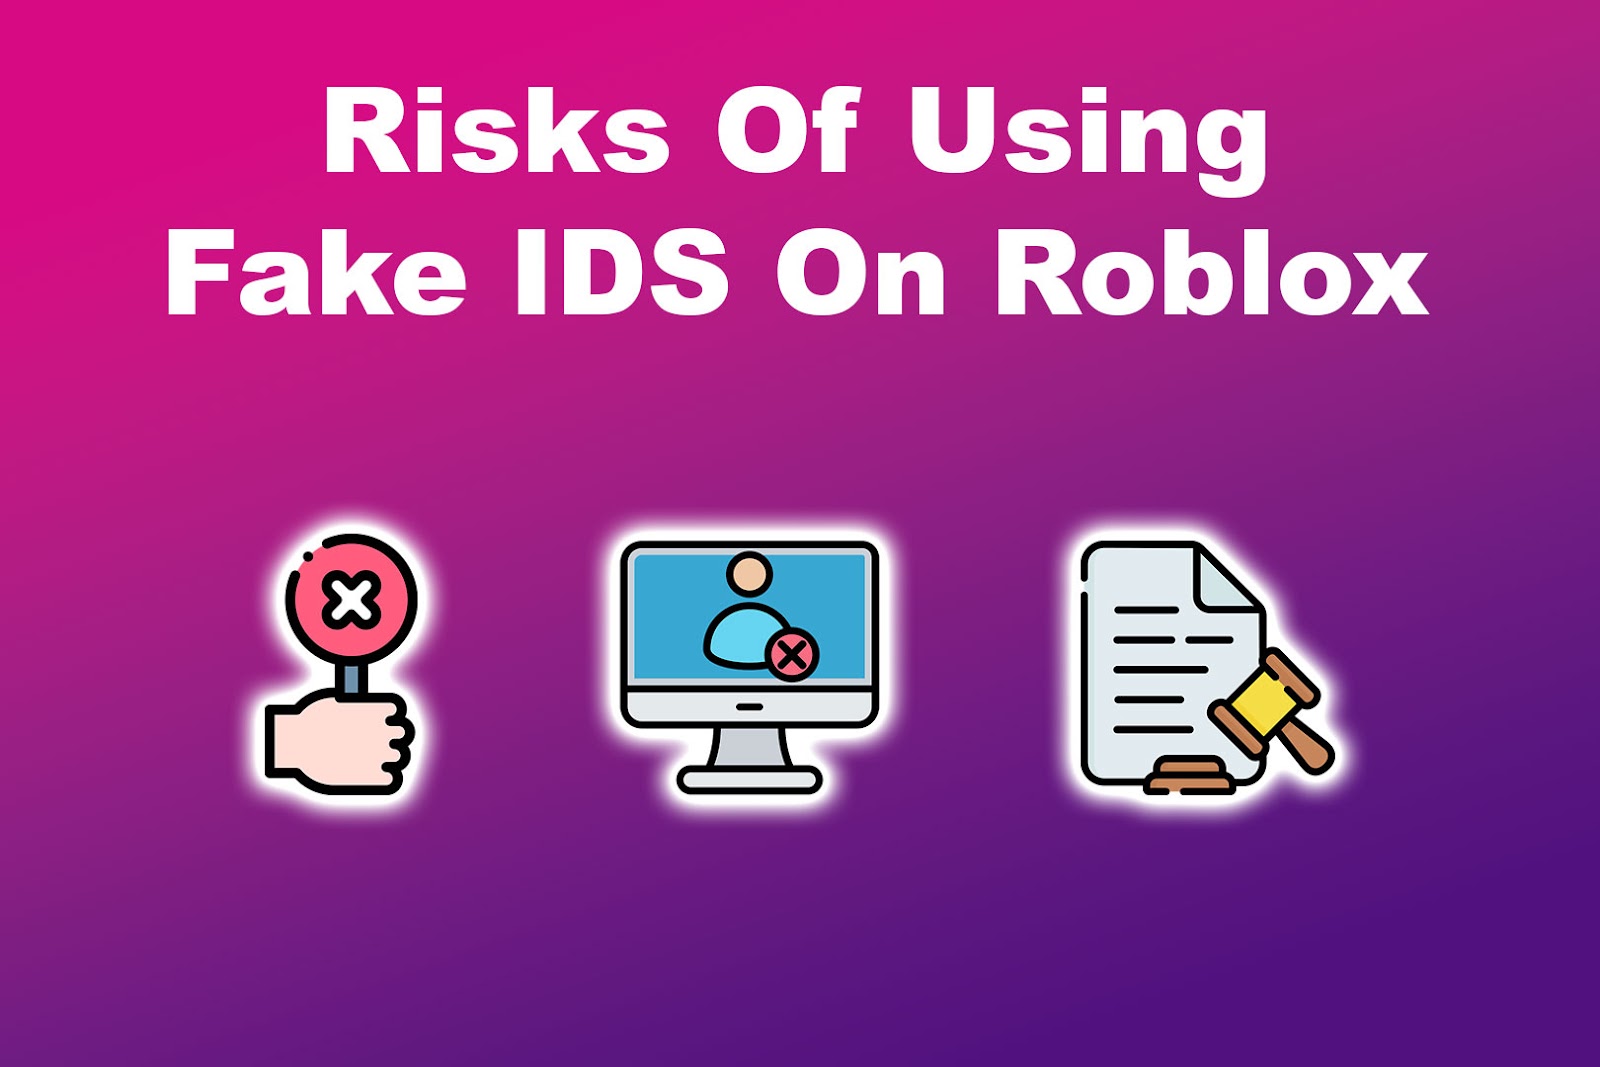 Risks Of Using Fake IDS On Roblox